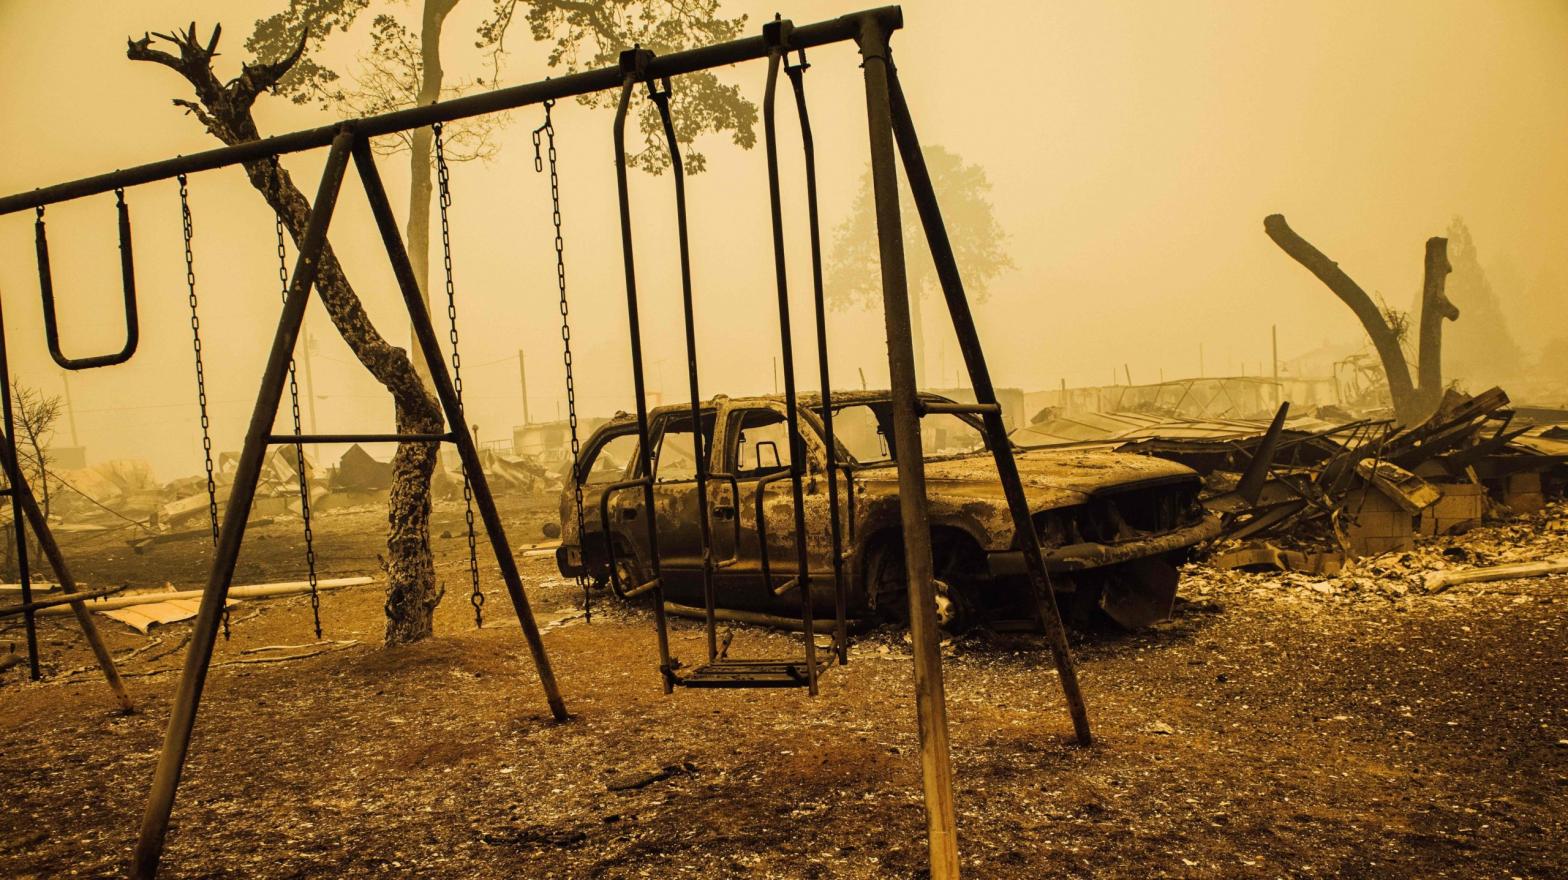 A charred swing set and car are seen after the passage of the Santiam Fire in Gates, Oregon, on September 10, 2020. (Photo: Kathryn Elsesser, Getty Images)